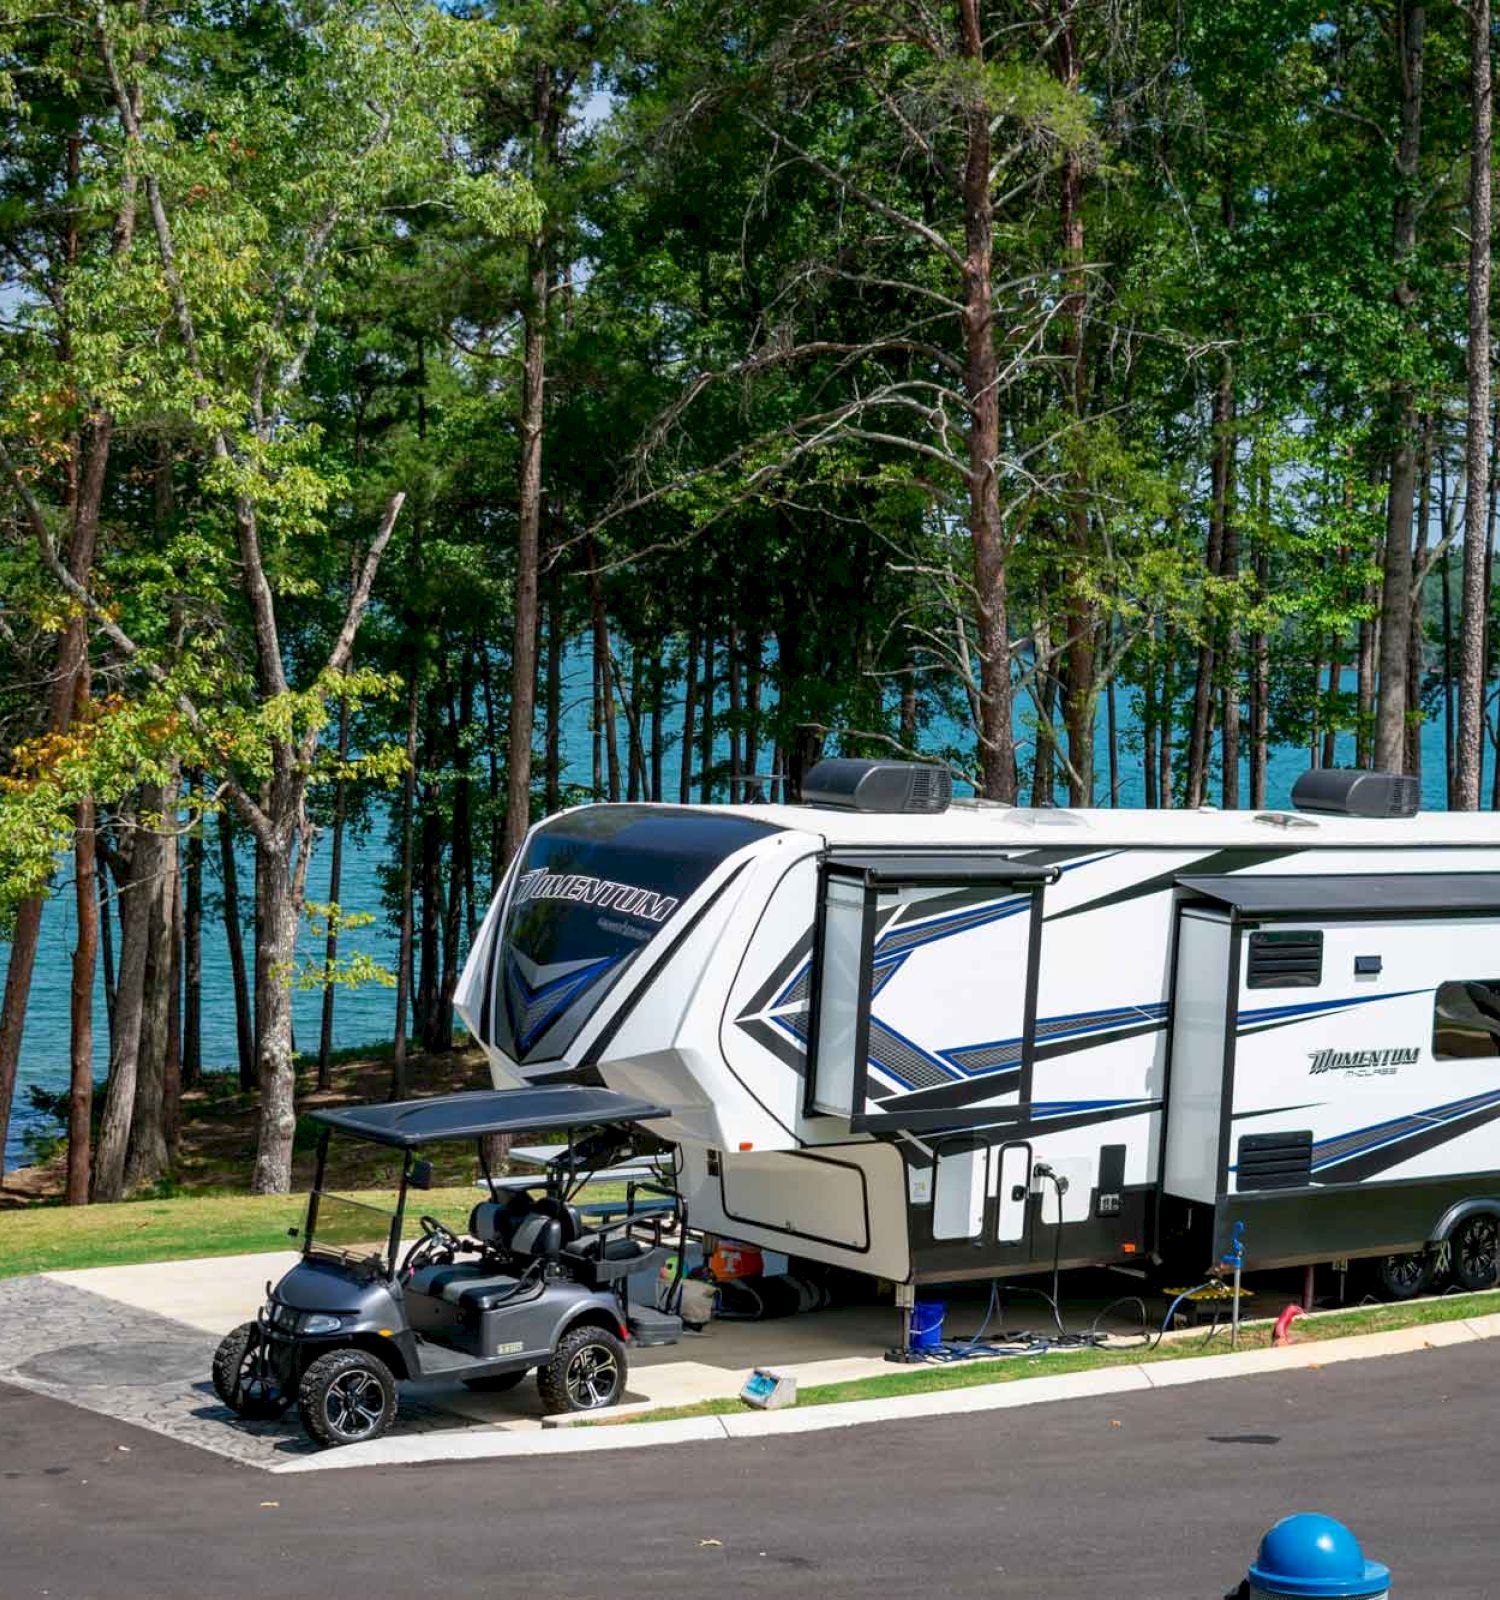 A parked RV with a golf cart by a lake surrounded by trees.